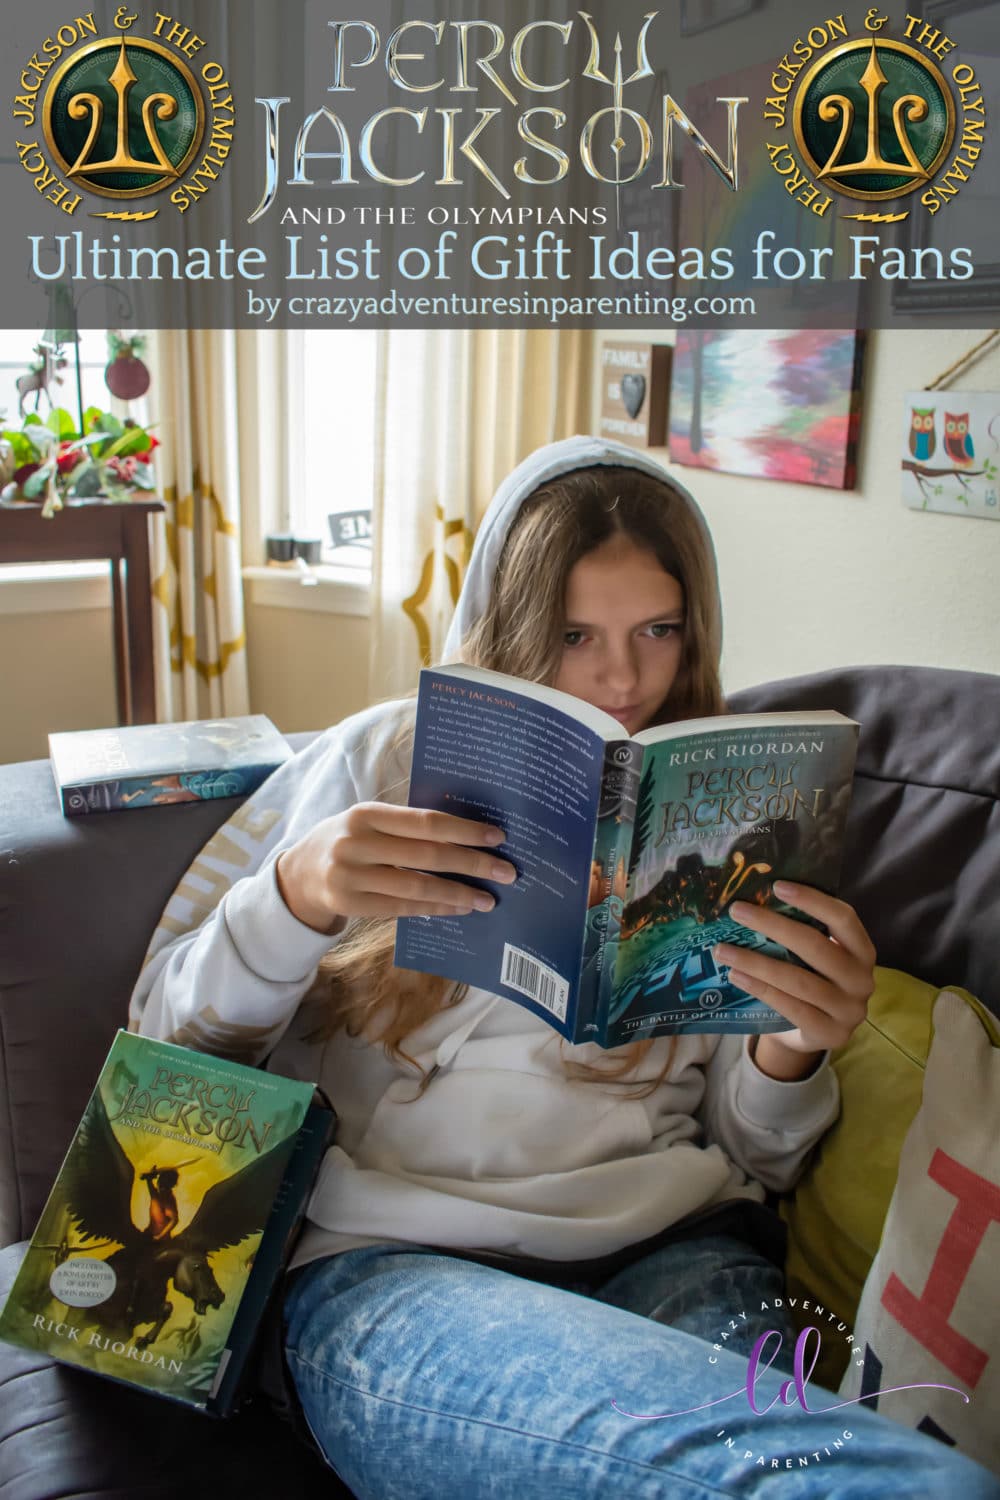 Percy Jackson and the Olympians Ultimate List of Gift Ideas for Fans